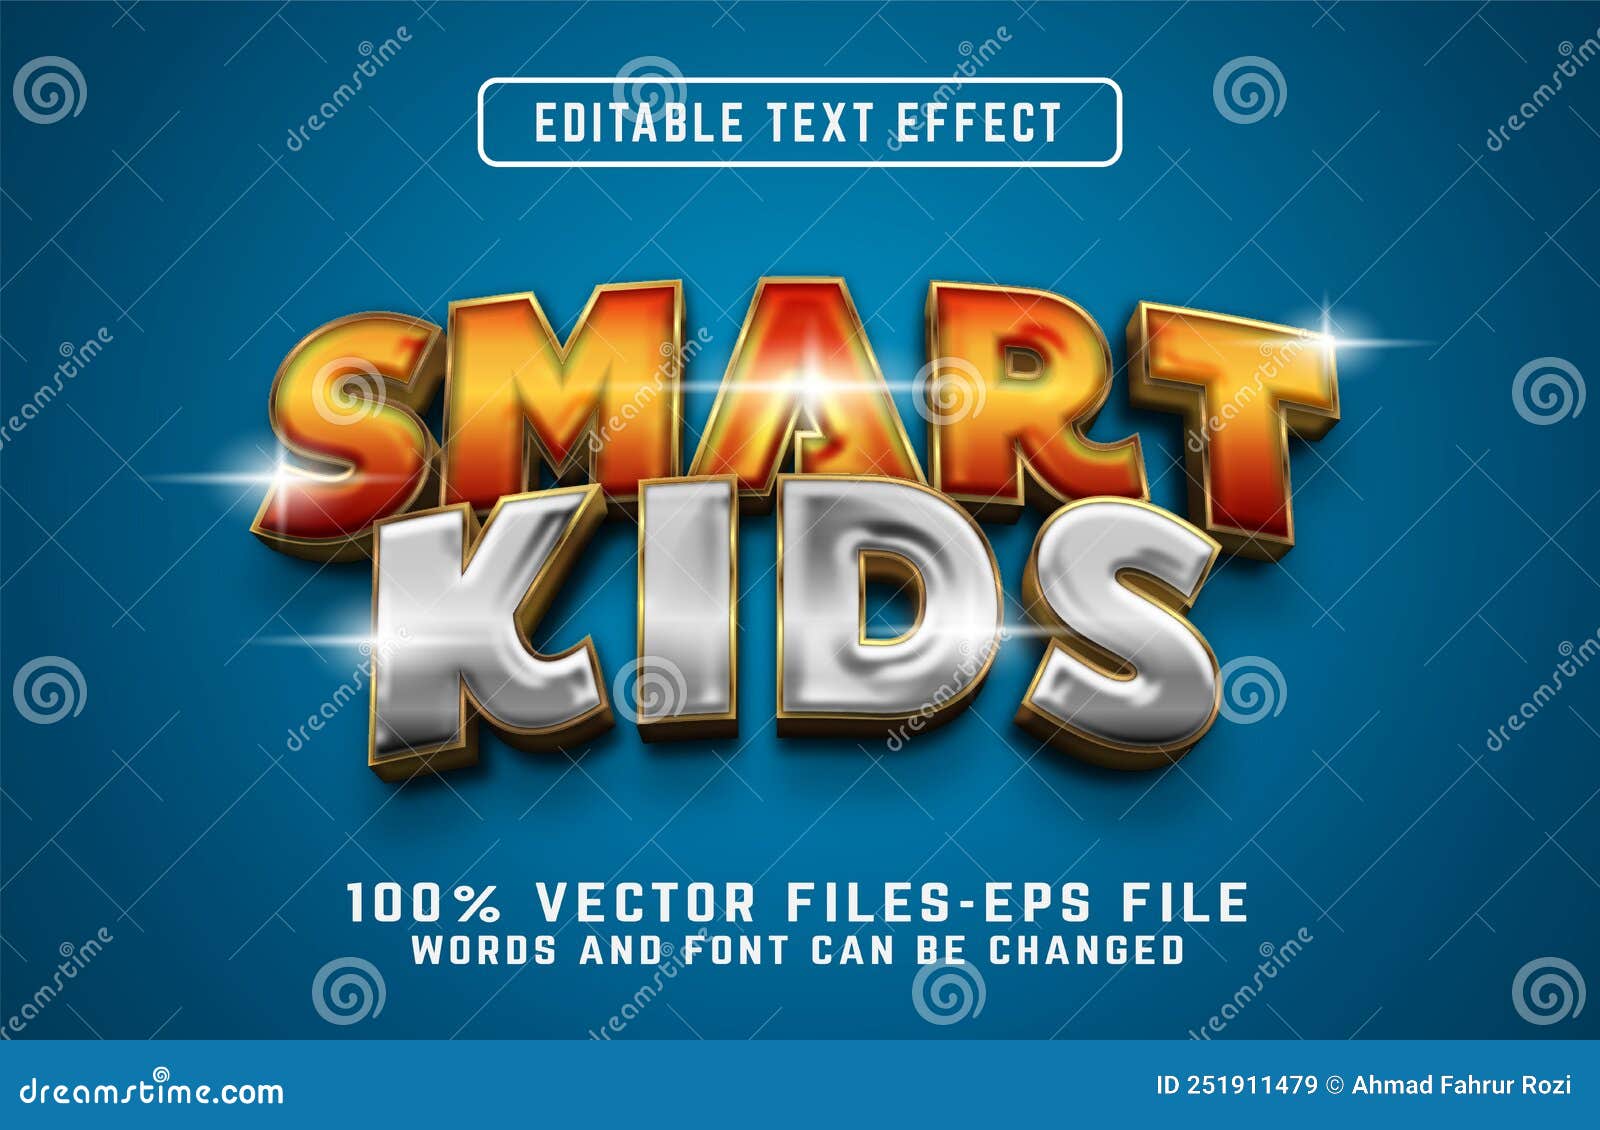 Premium PSD  Funny game 3d editable text effect psd with premium background